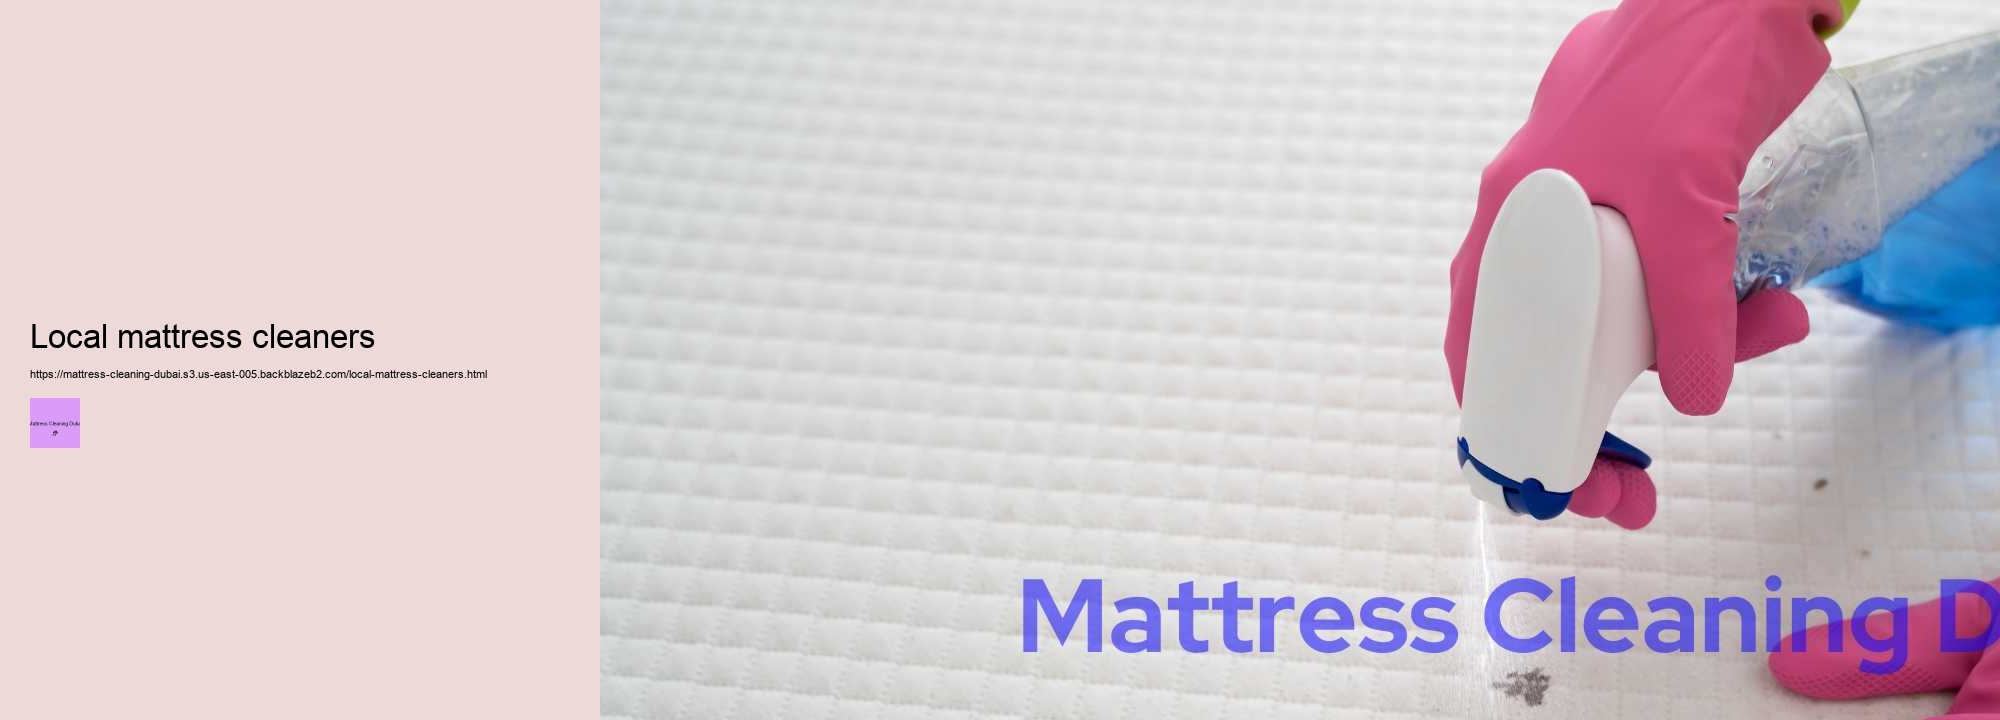 Local mattress cleaners